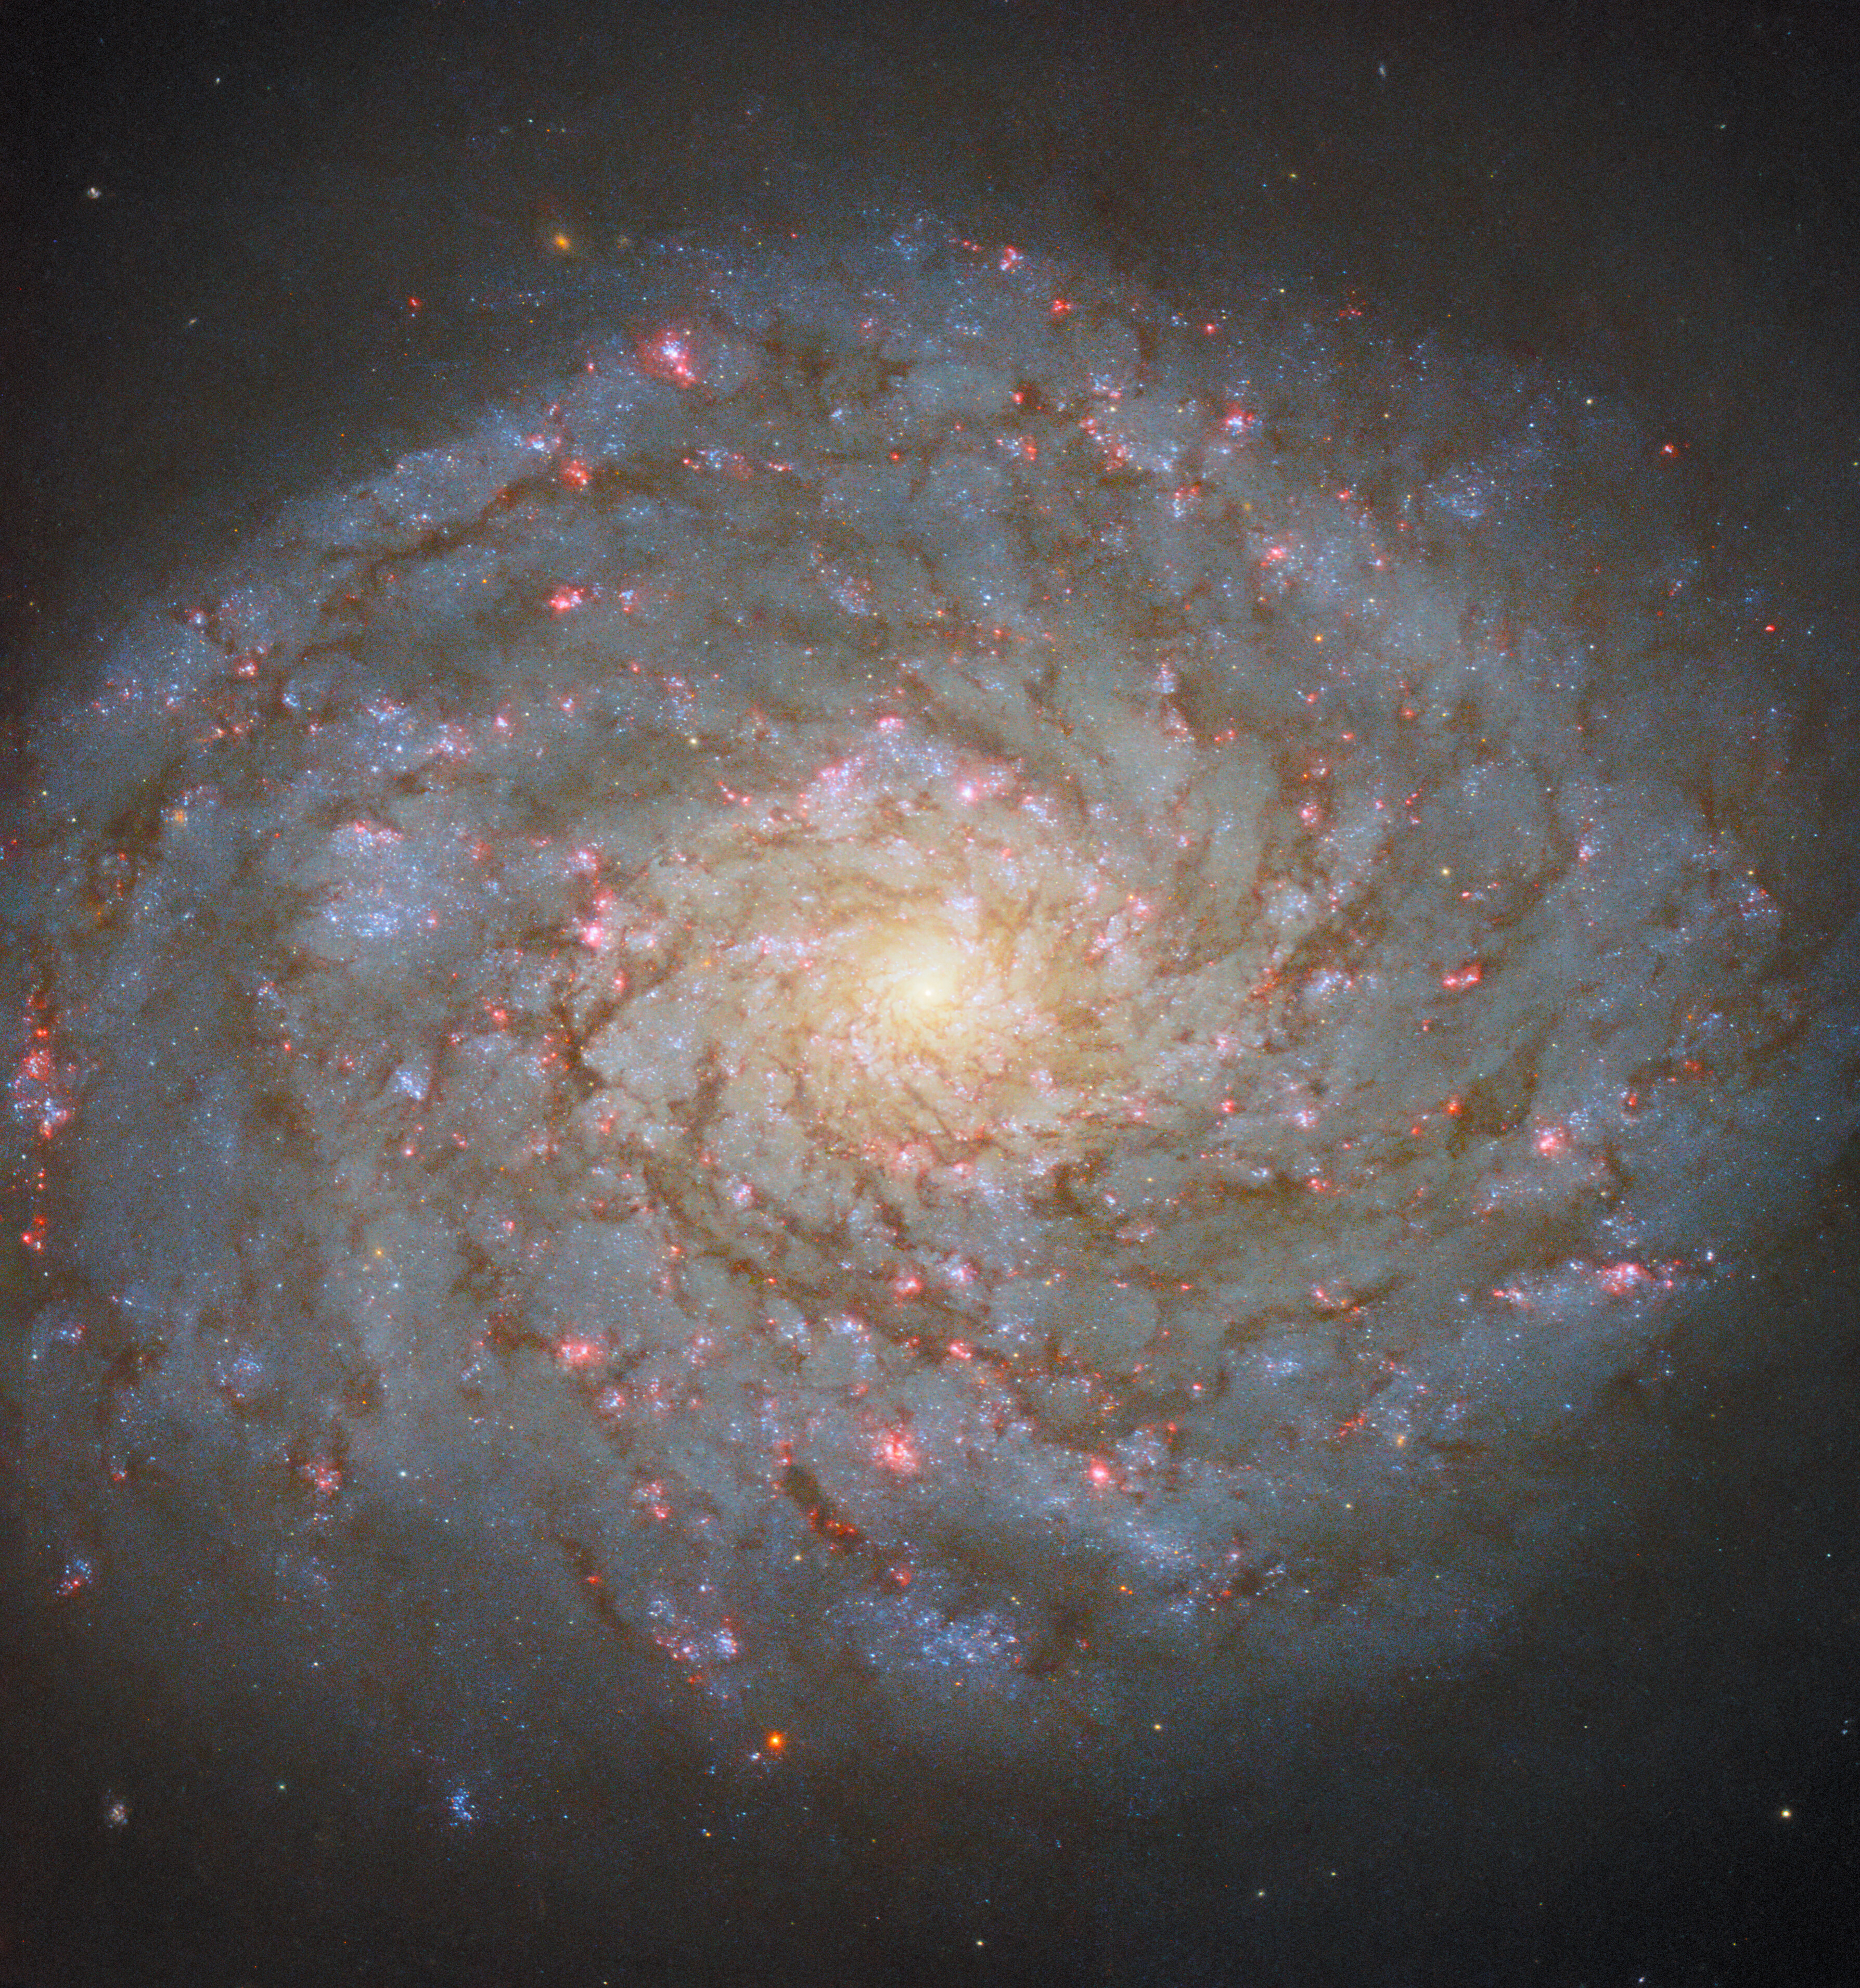 A close-up view of a spiral galaxy fills most of the scene. It has a bright, glowing spot at its core, broad spiral arms that hold many dark threads of dust, and pink glowing spots across the disk that mark areas of star formation. A faint halo that bleeds into the dark background surrounds the galaxy’s disk.